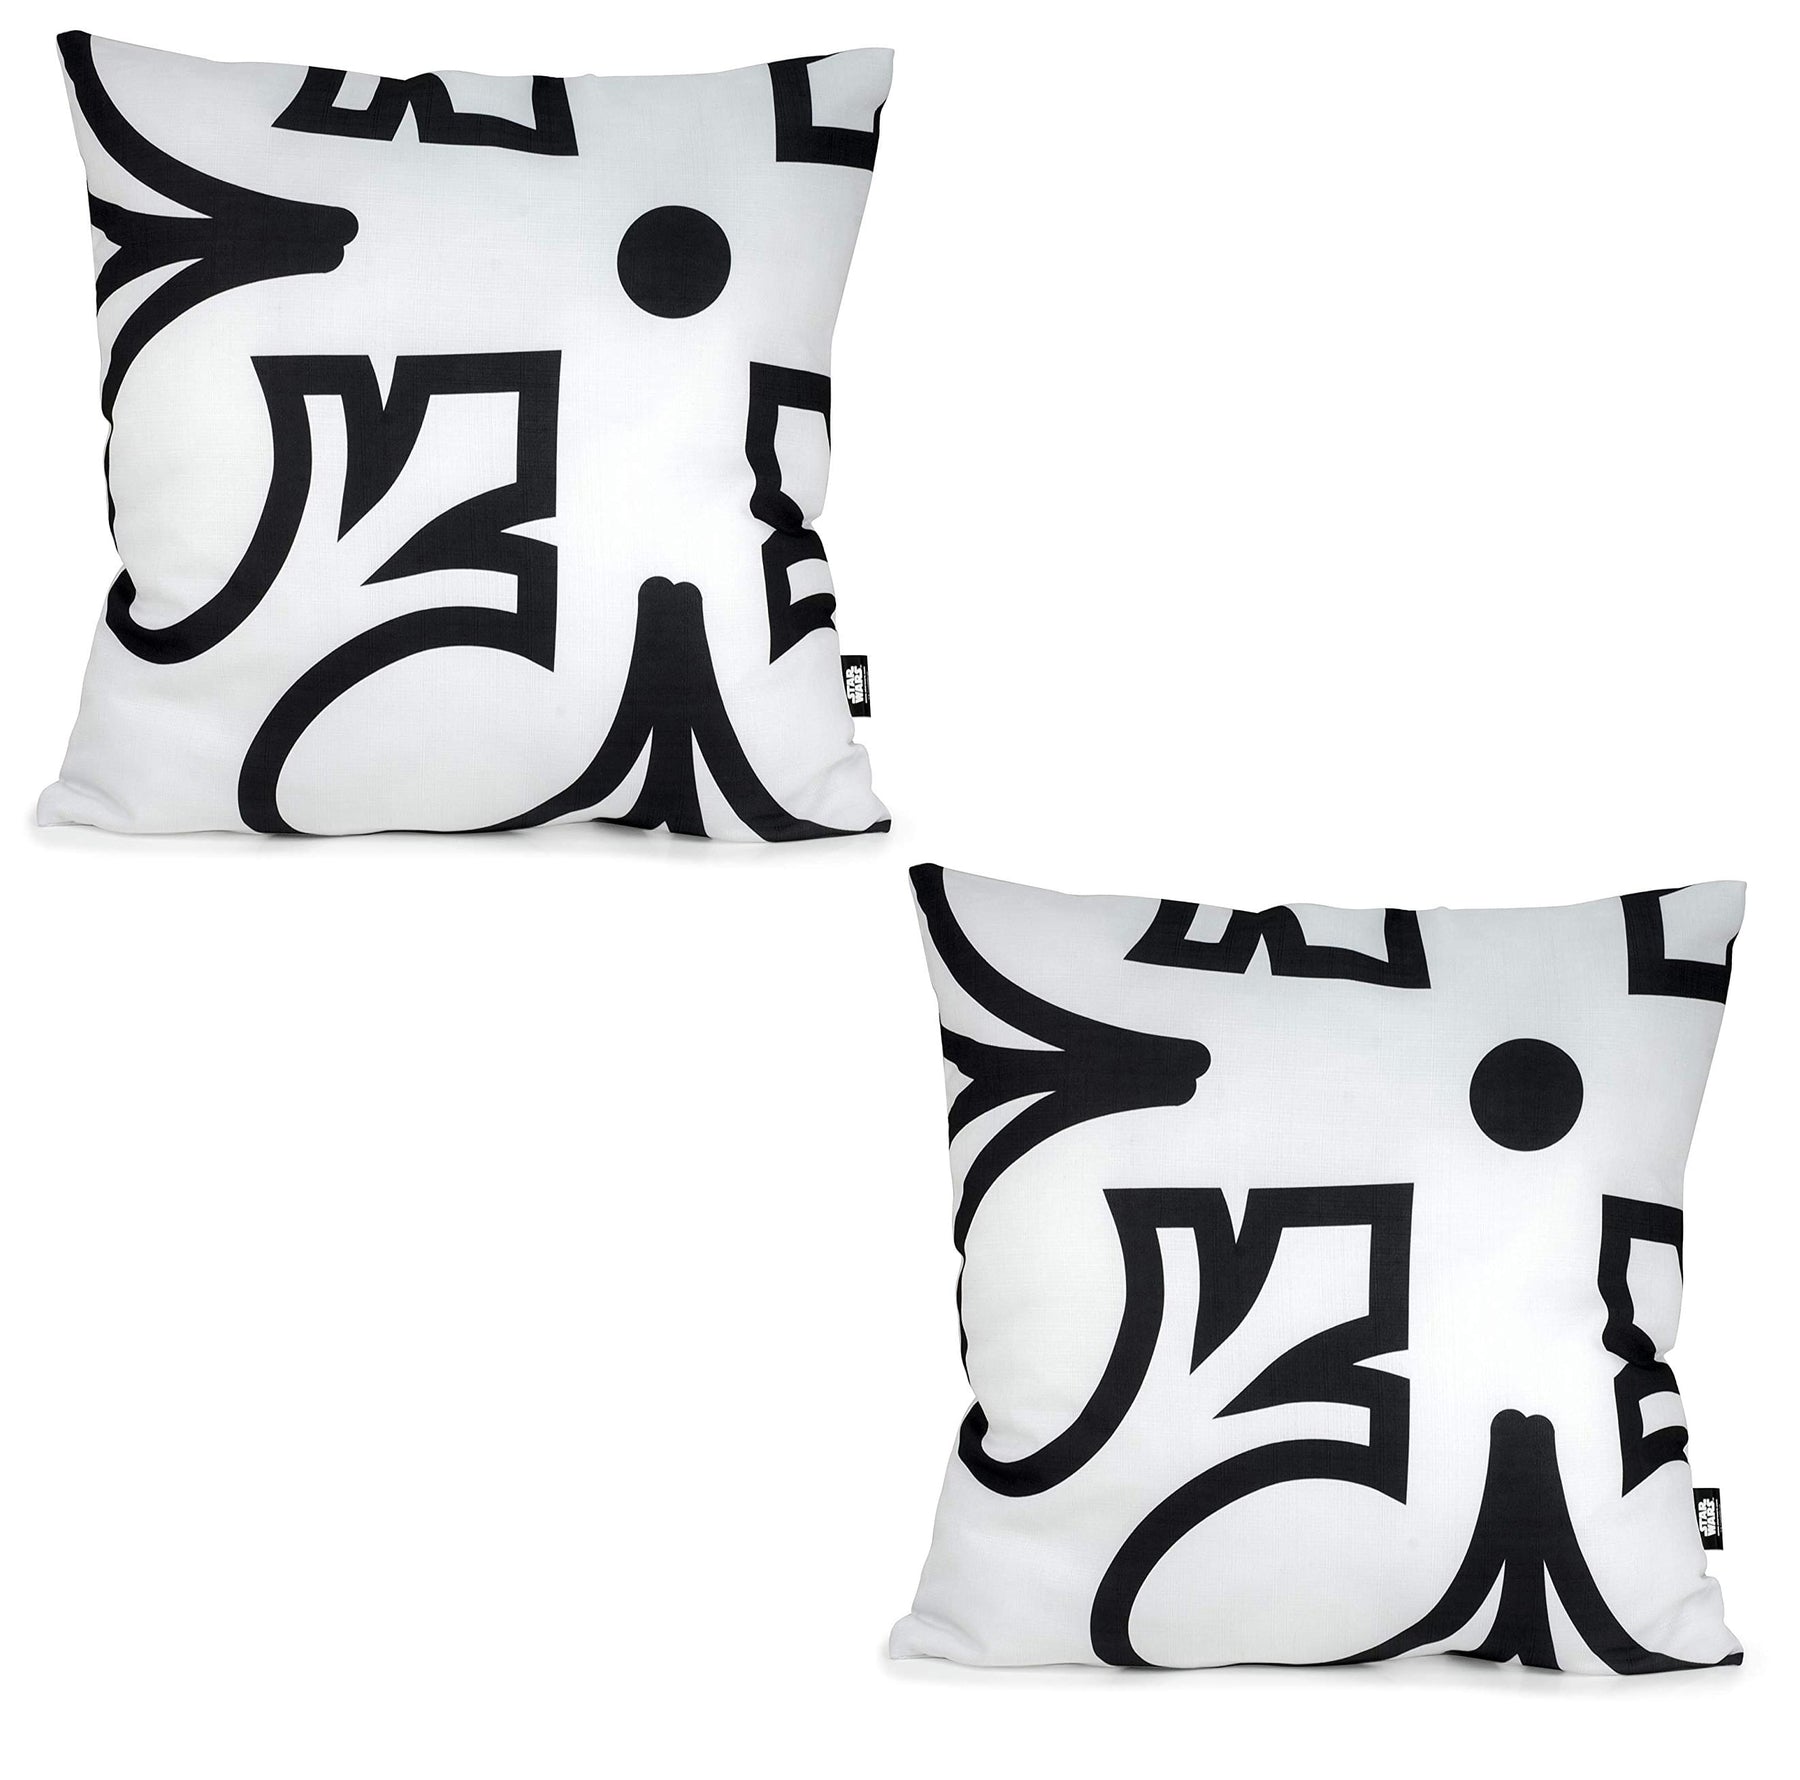 Star Wars White Throw Pillow | Black Rebel Insignia | 25 x 25 Inches | Set of 2